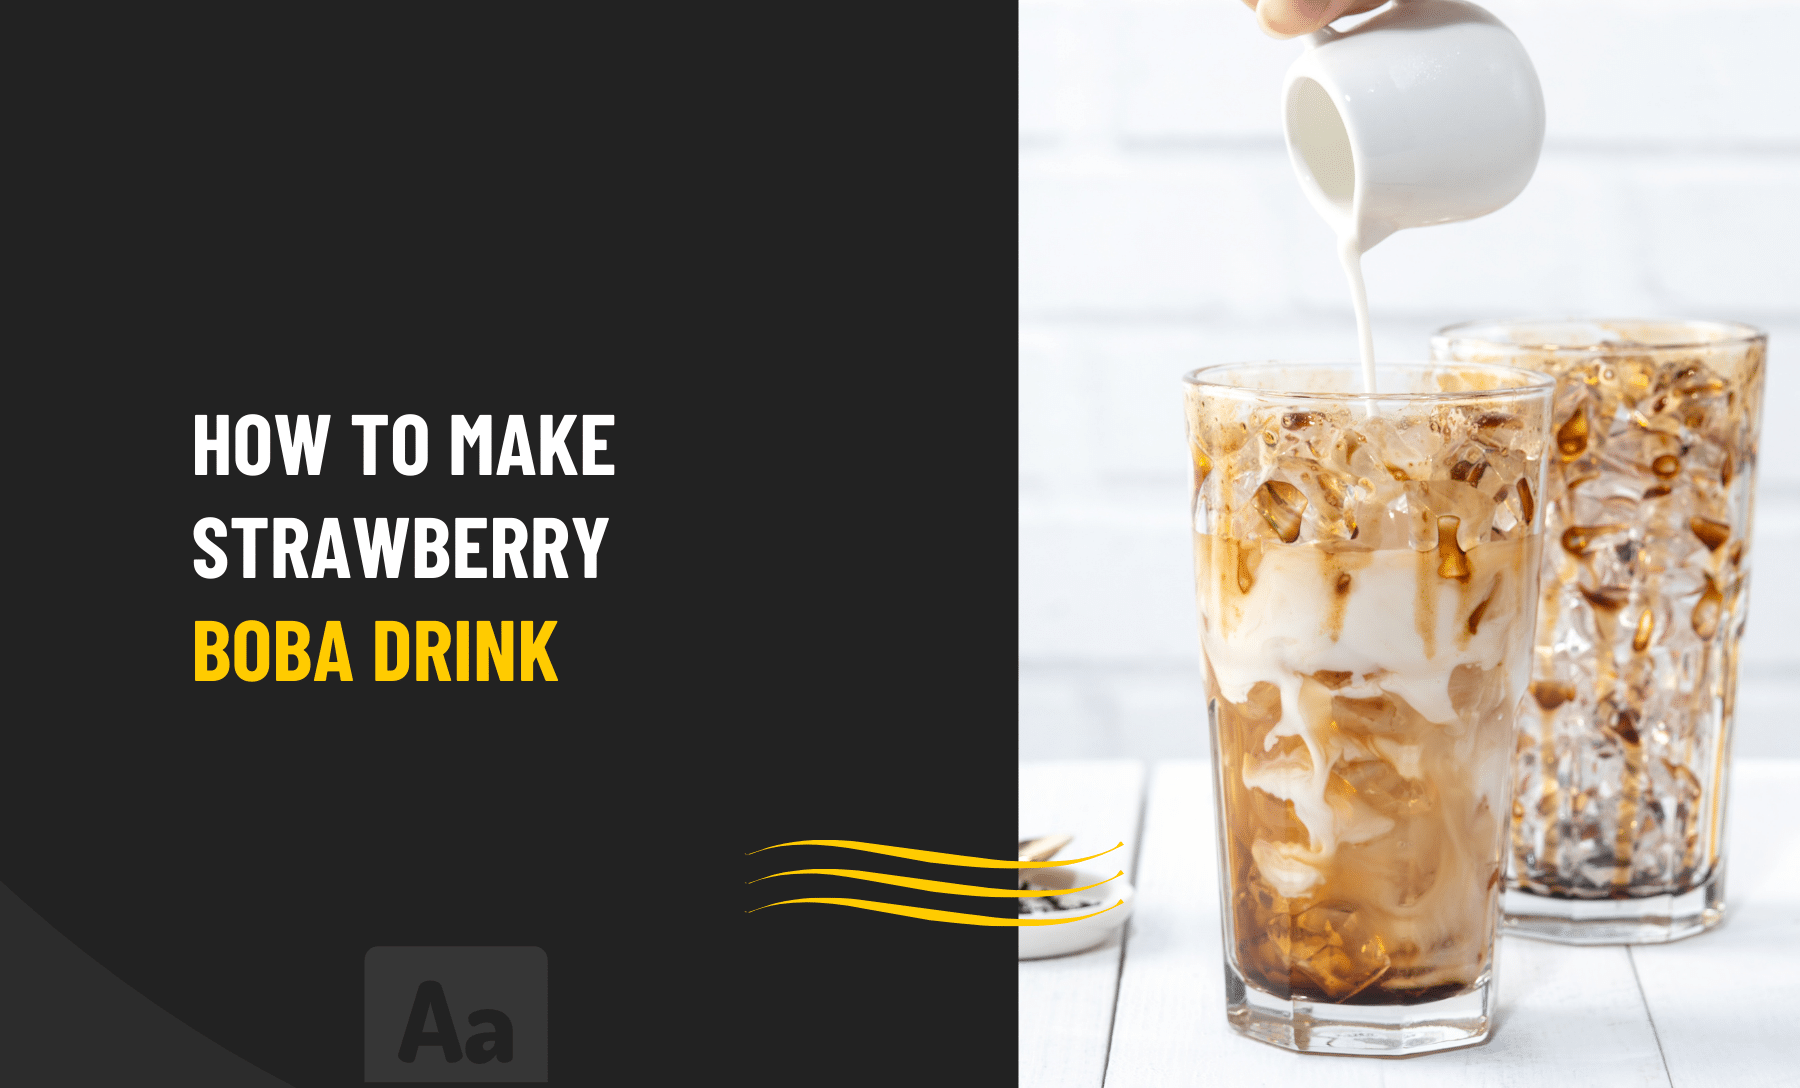 How to make Strawberry Boba Drink